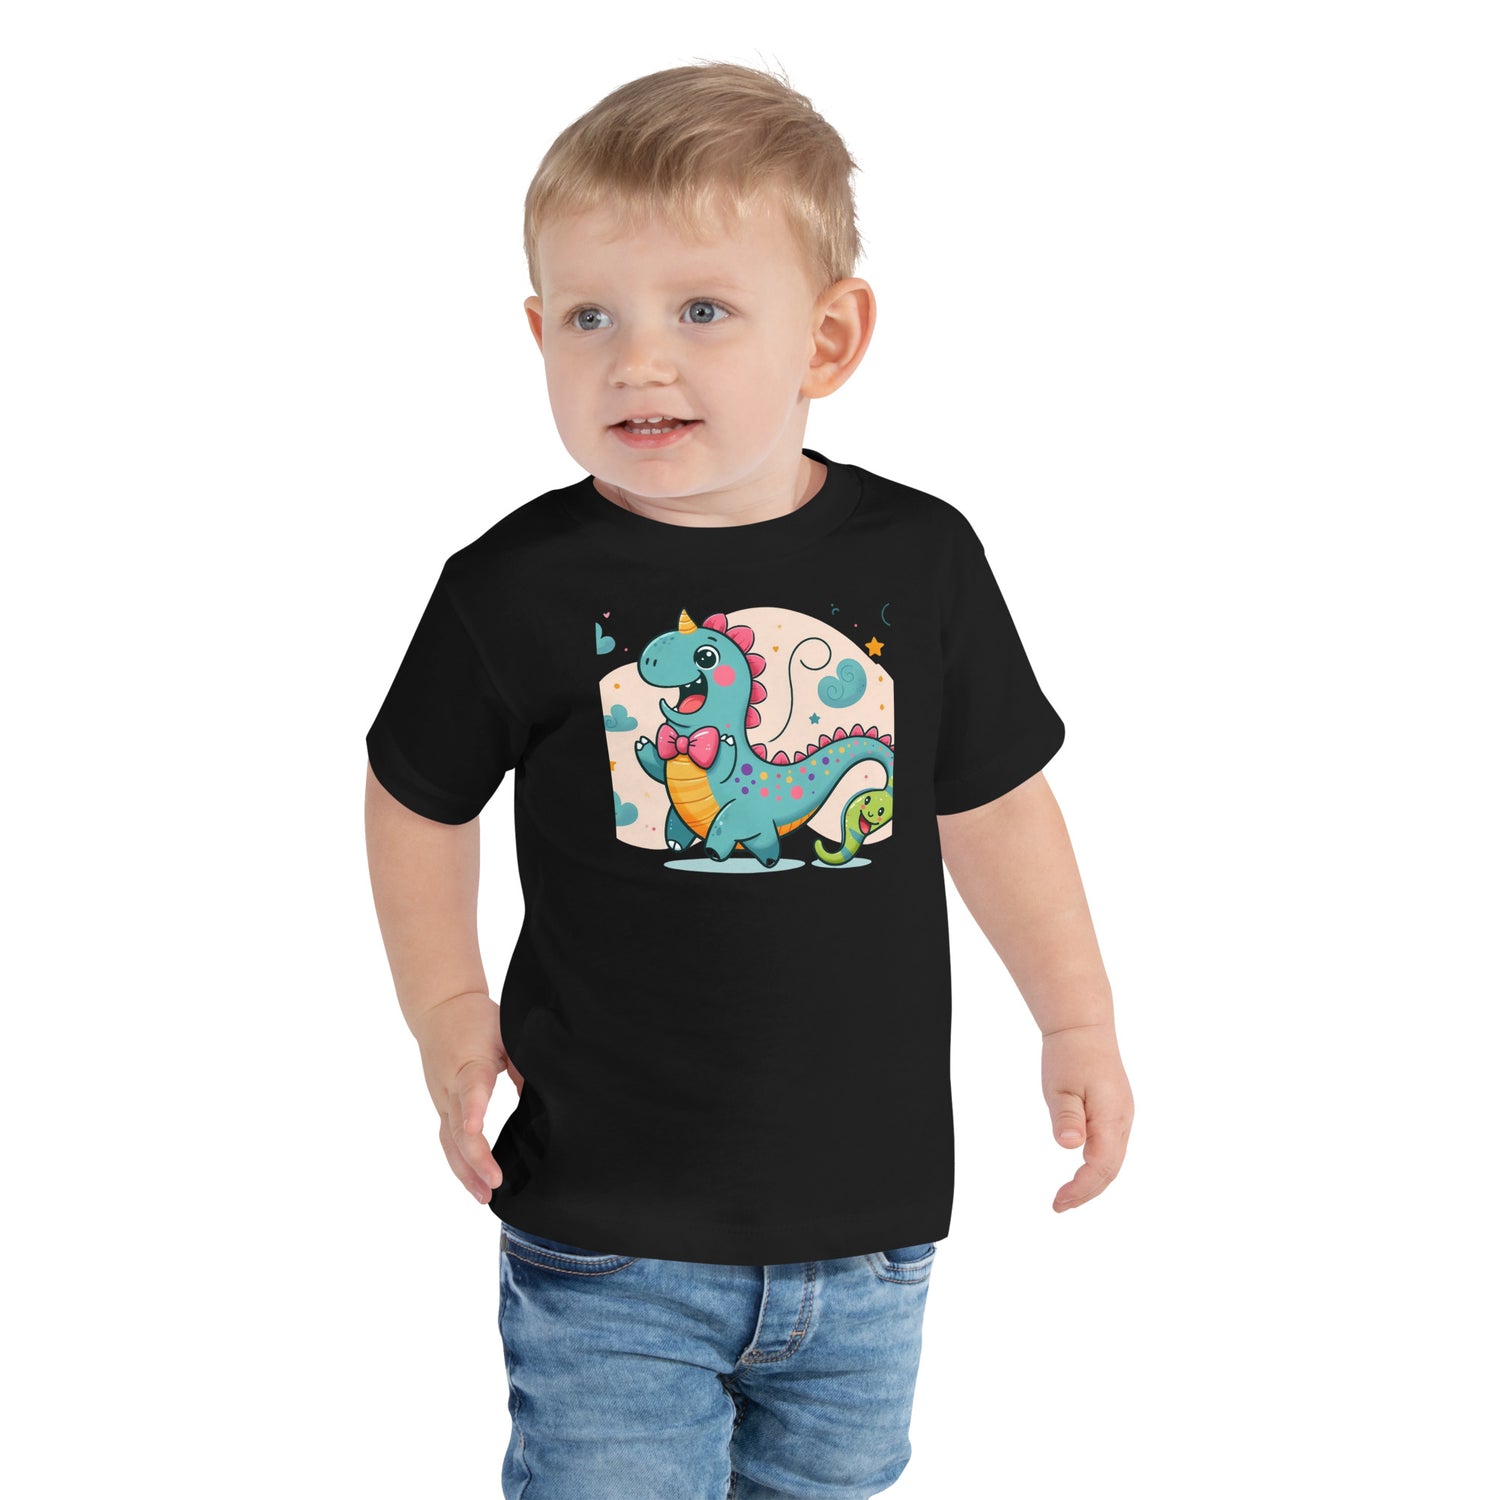 Whimsy Tail Dino Delight Tee for Toddlers